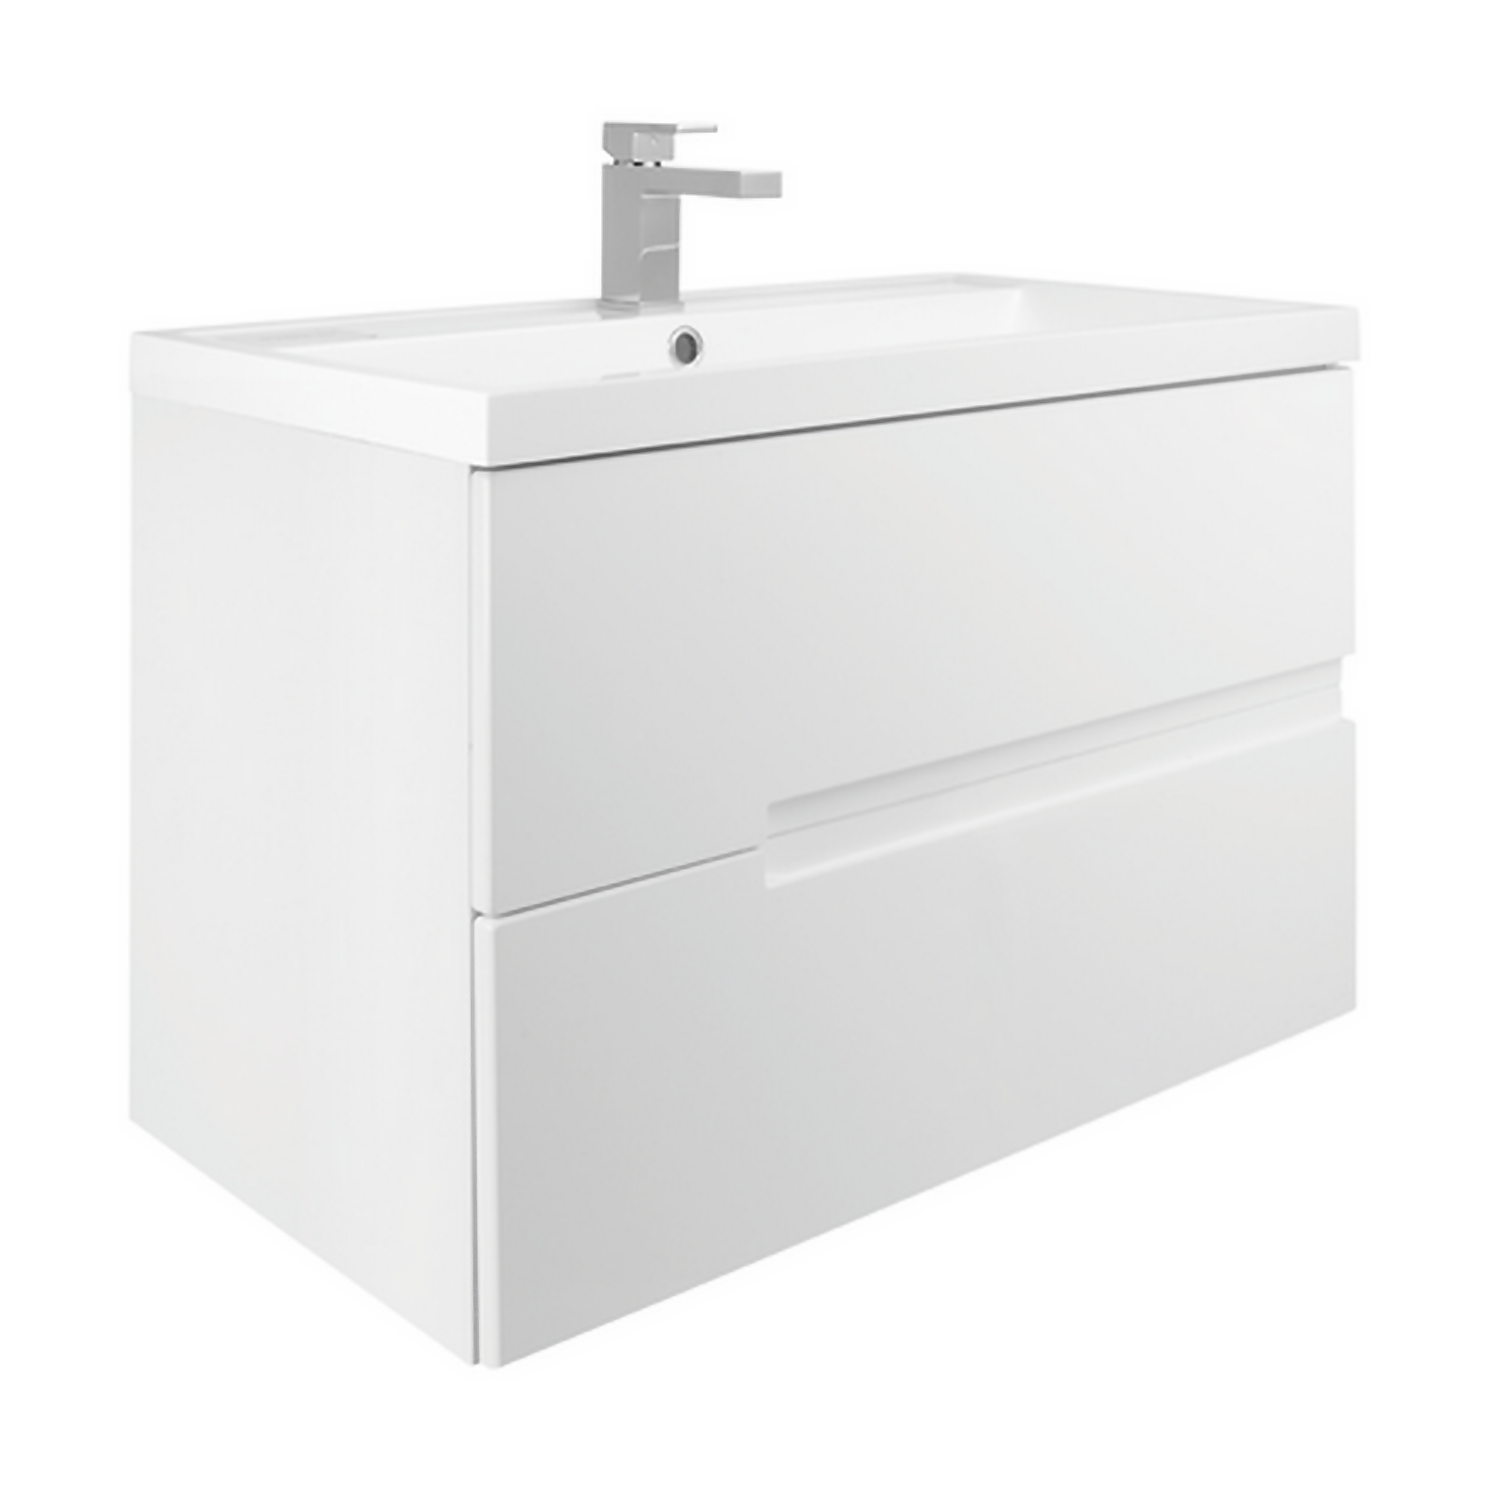 Vermont 800mm Wall Hung Vanity Unit with Basin - Gloss White